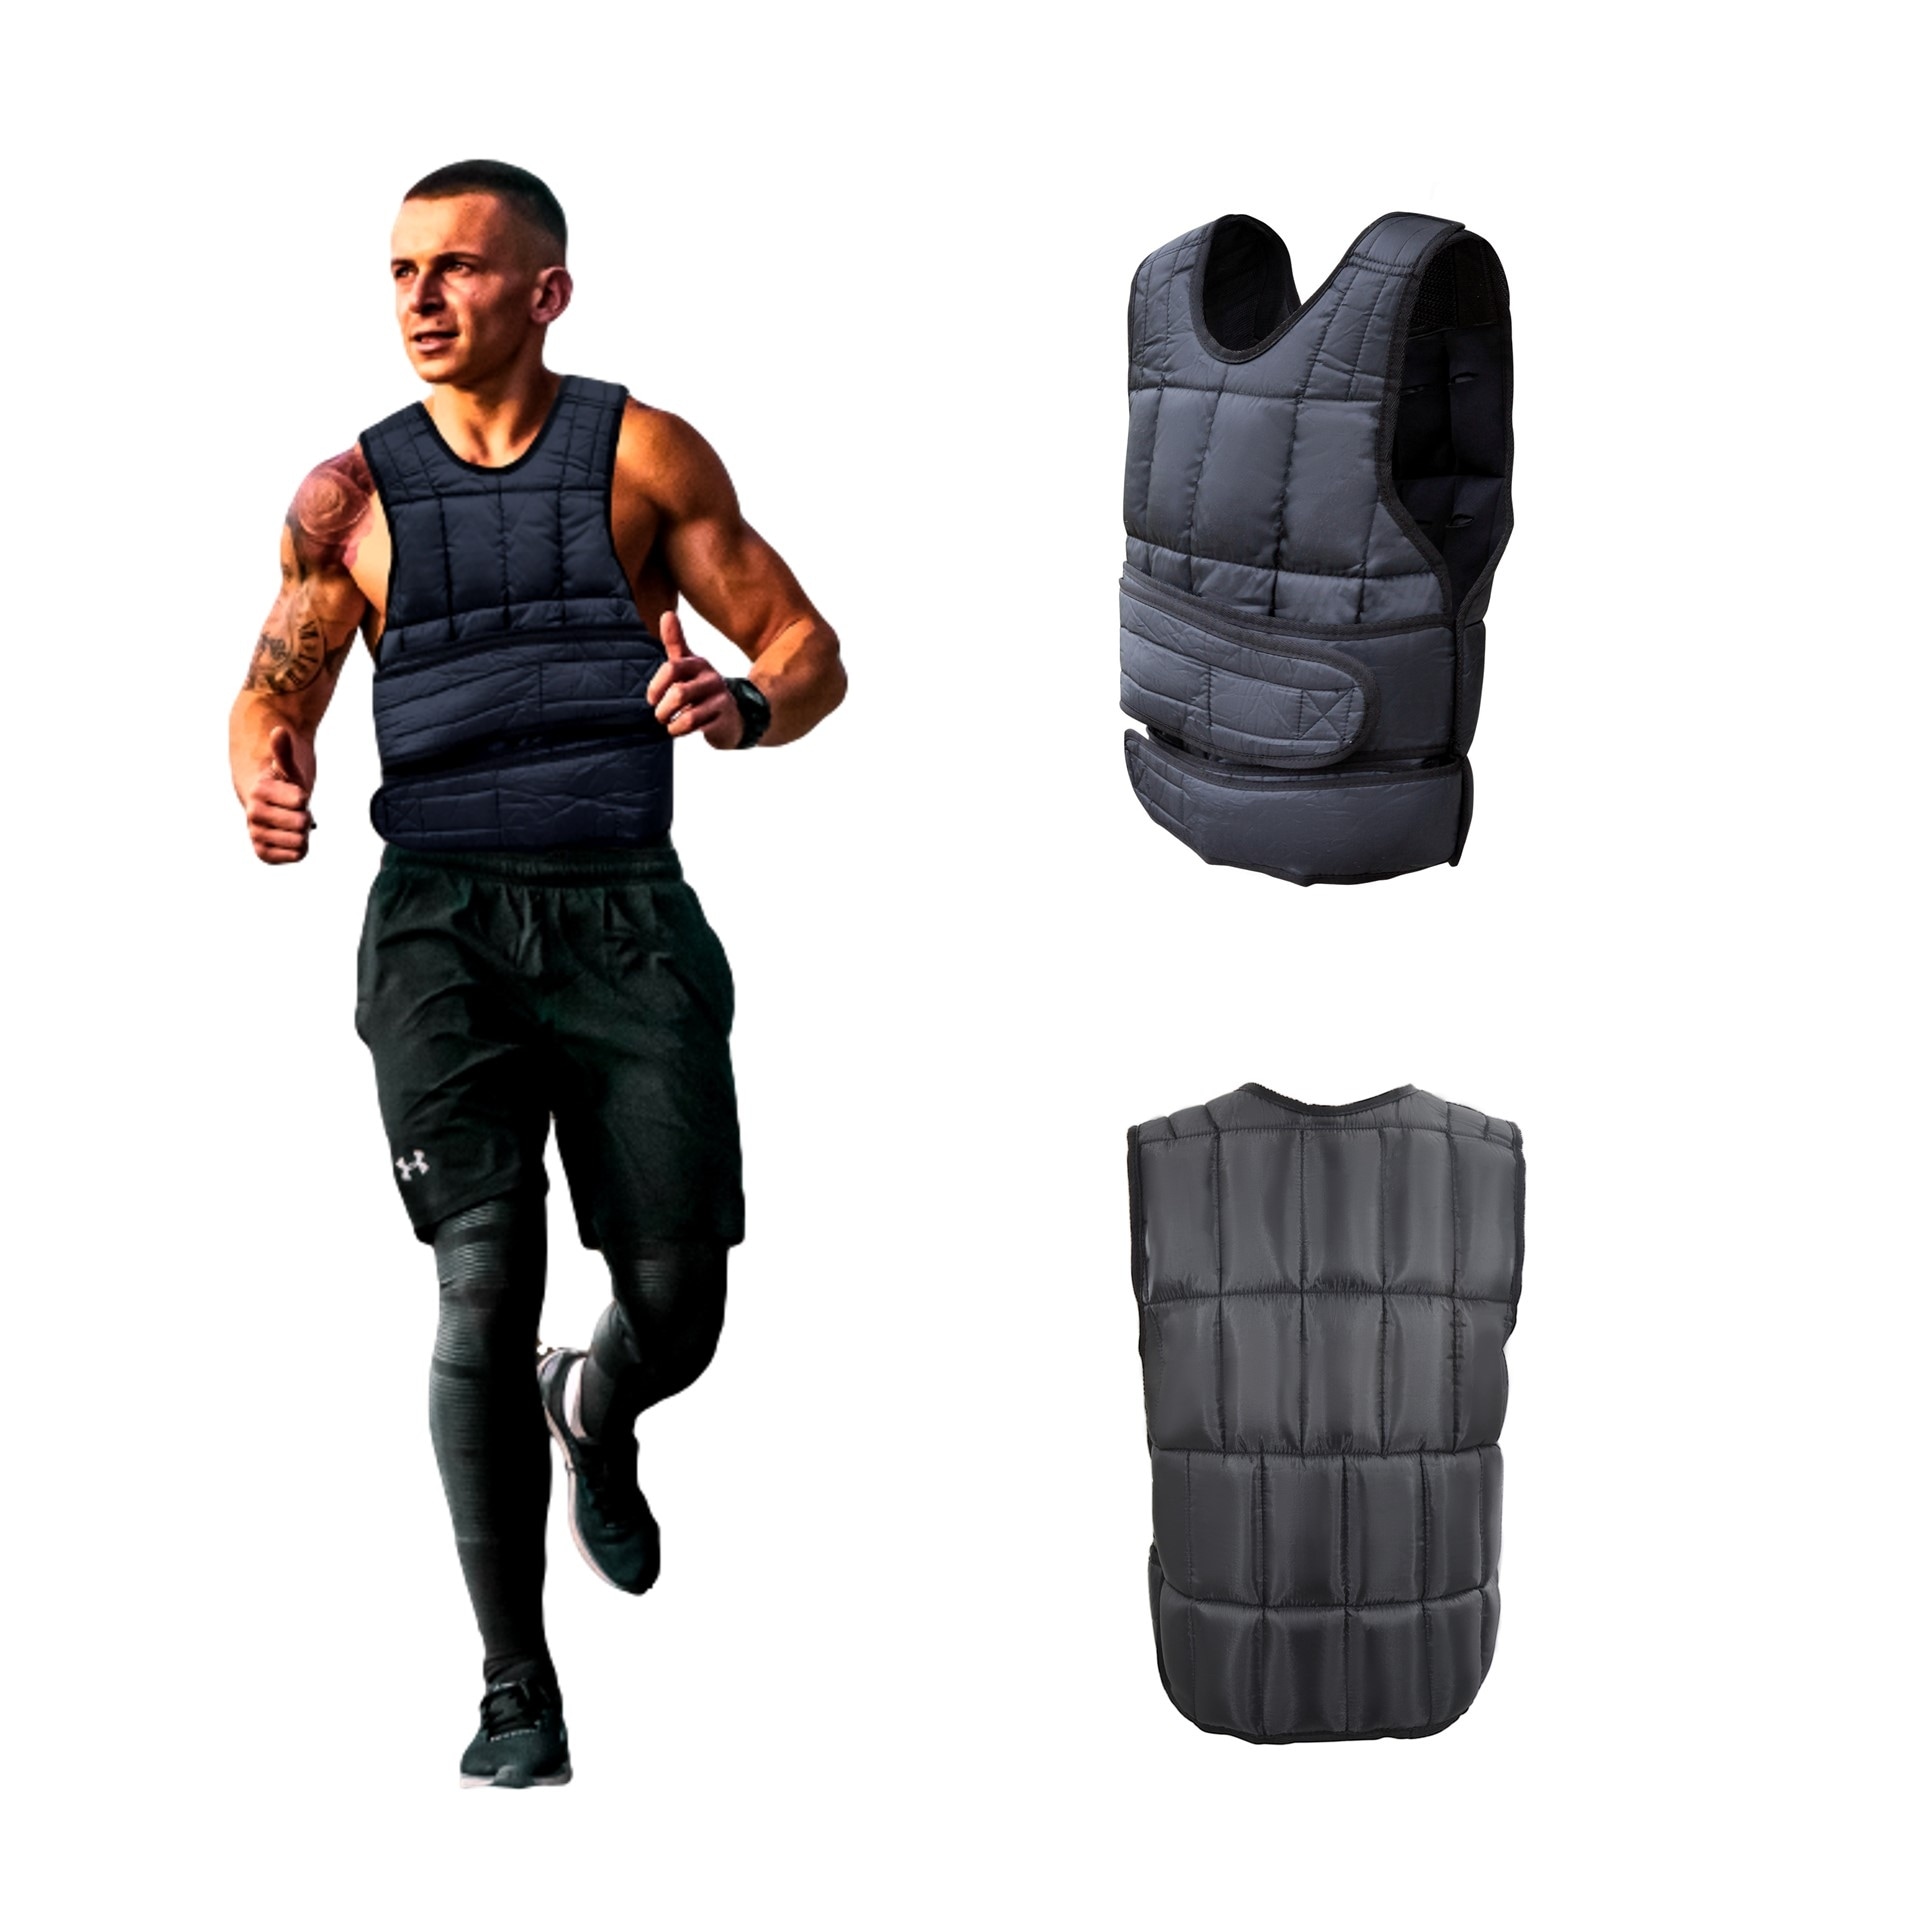 https://ak1.ostkcdn.com/images/products/is/images/direct/9652b1407003ab6bf4831bfa53caf10ba37b5b27/BLACK-ONLY-Weighted-Vest%2C-Body-Weight-Sandbag-for-Cardio-Workout-Fitness-Training.jpg